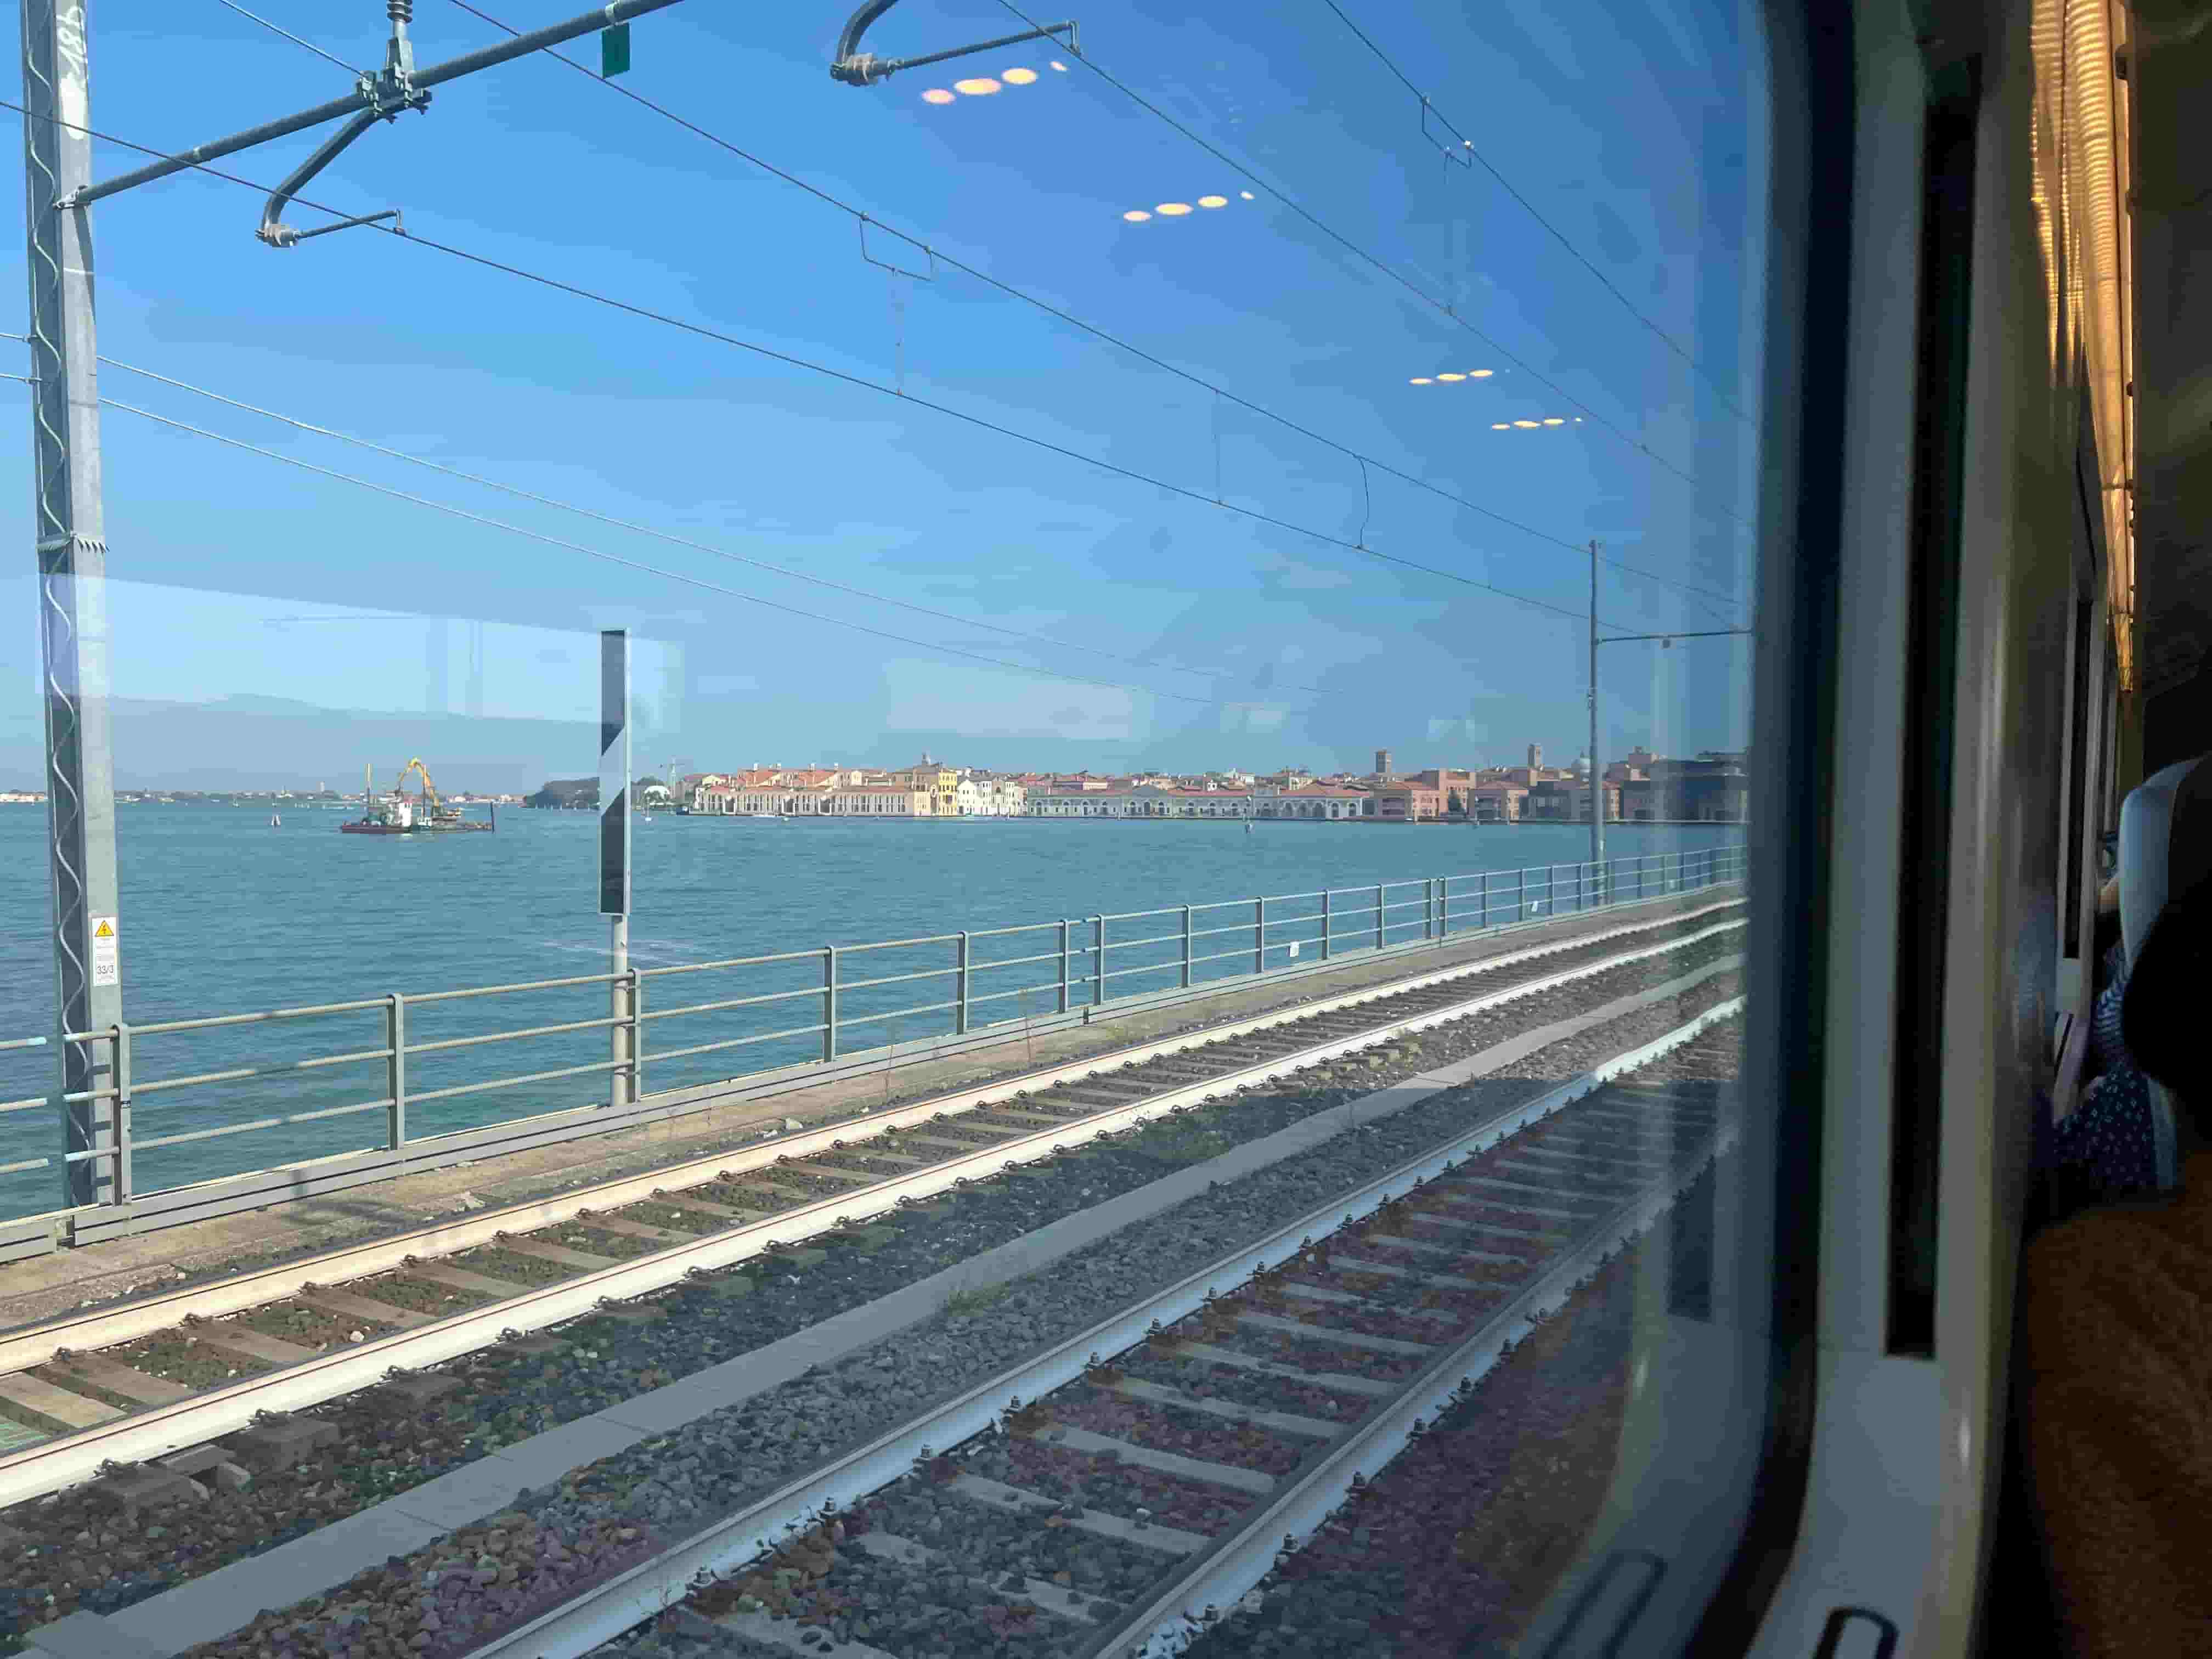 View from train window on a train between Venice and Rome in Italy